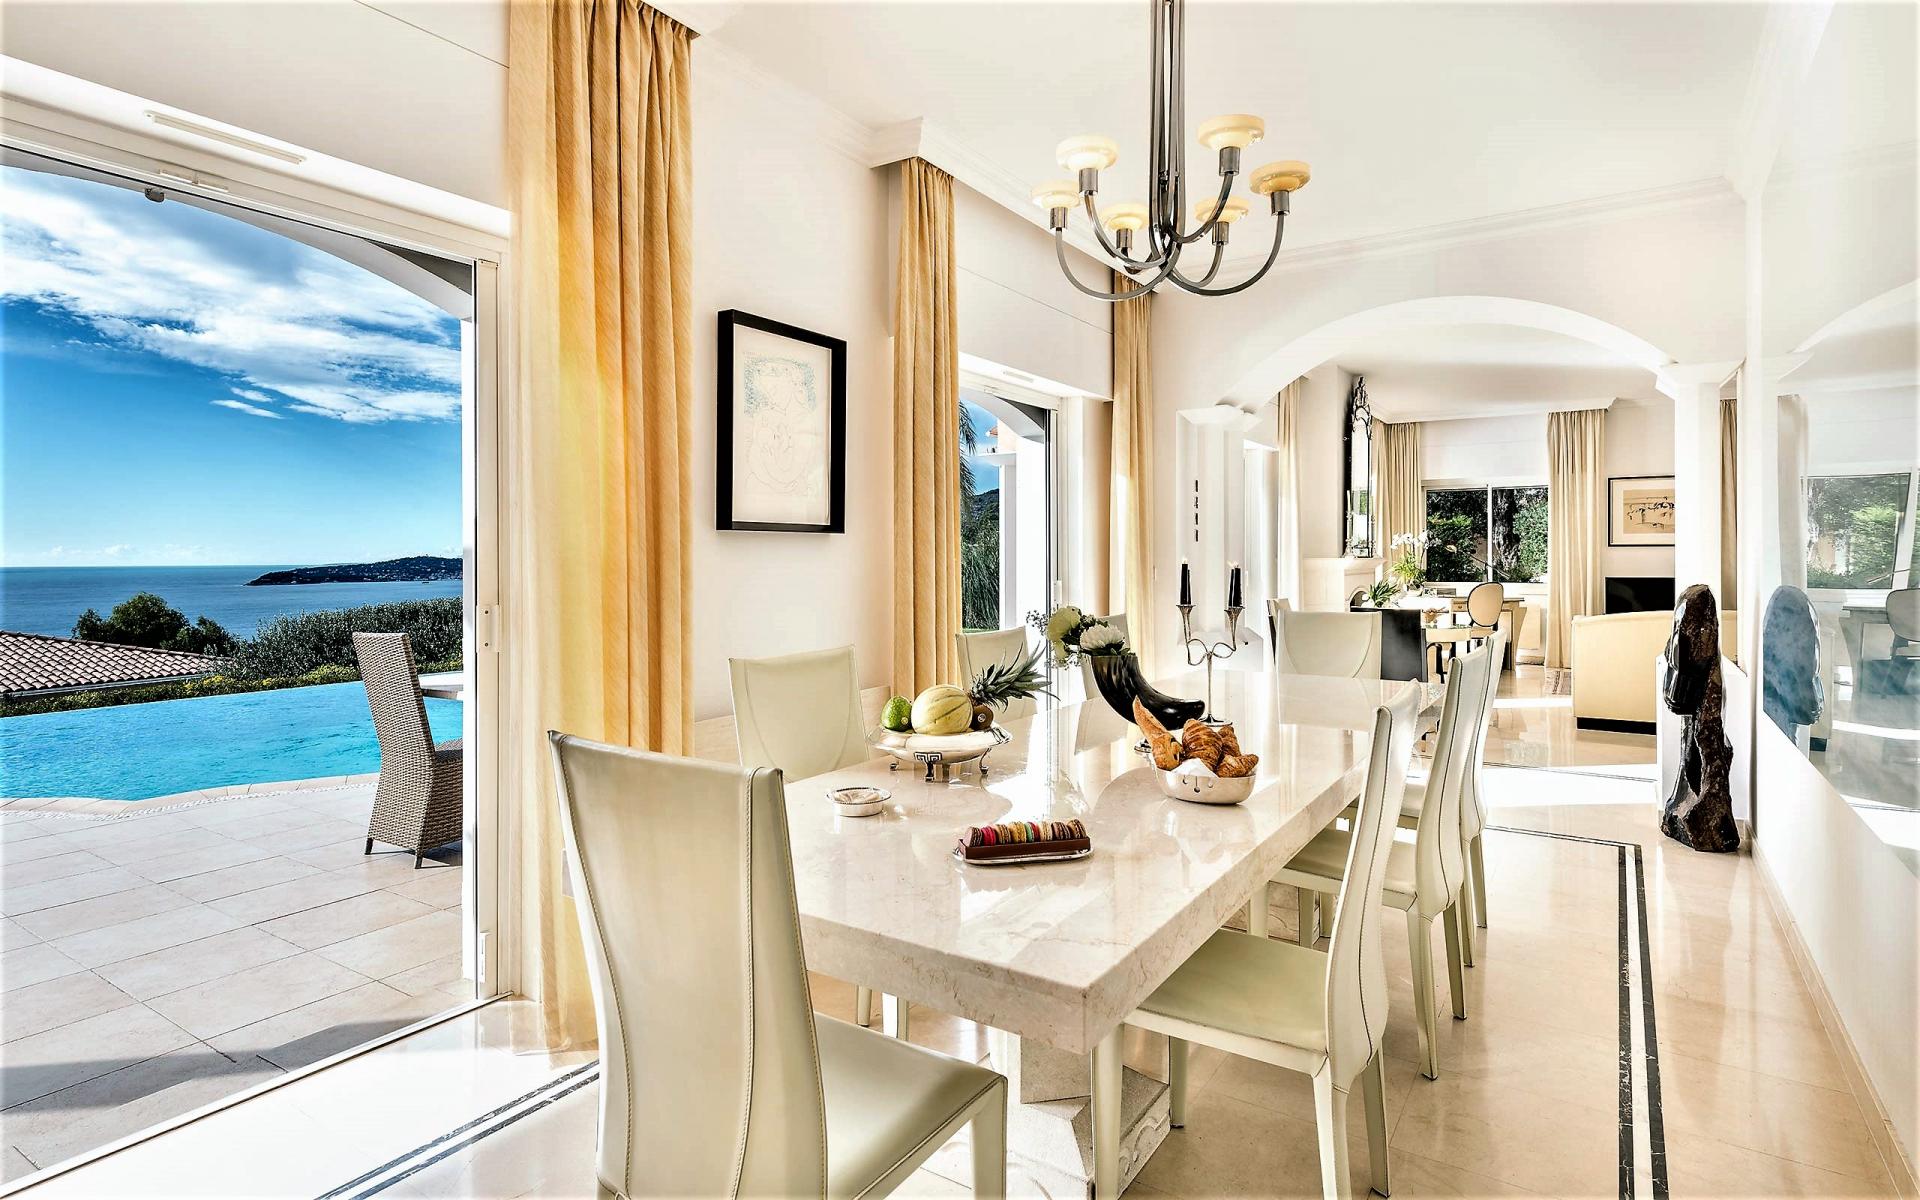 THE DINING ROOM AND ITS SEA VIEWS IN VILLA ROSE